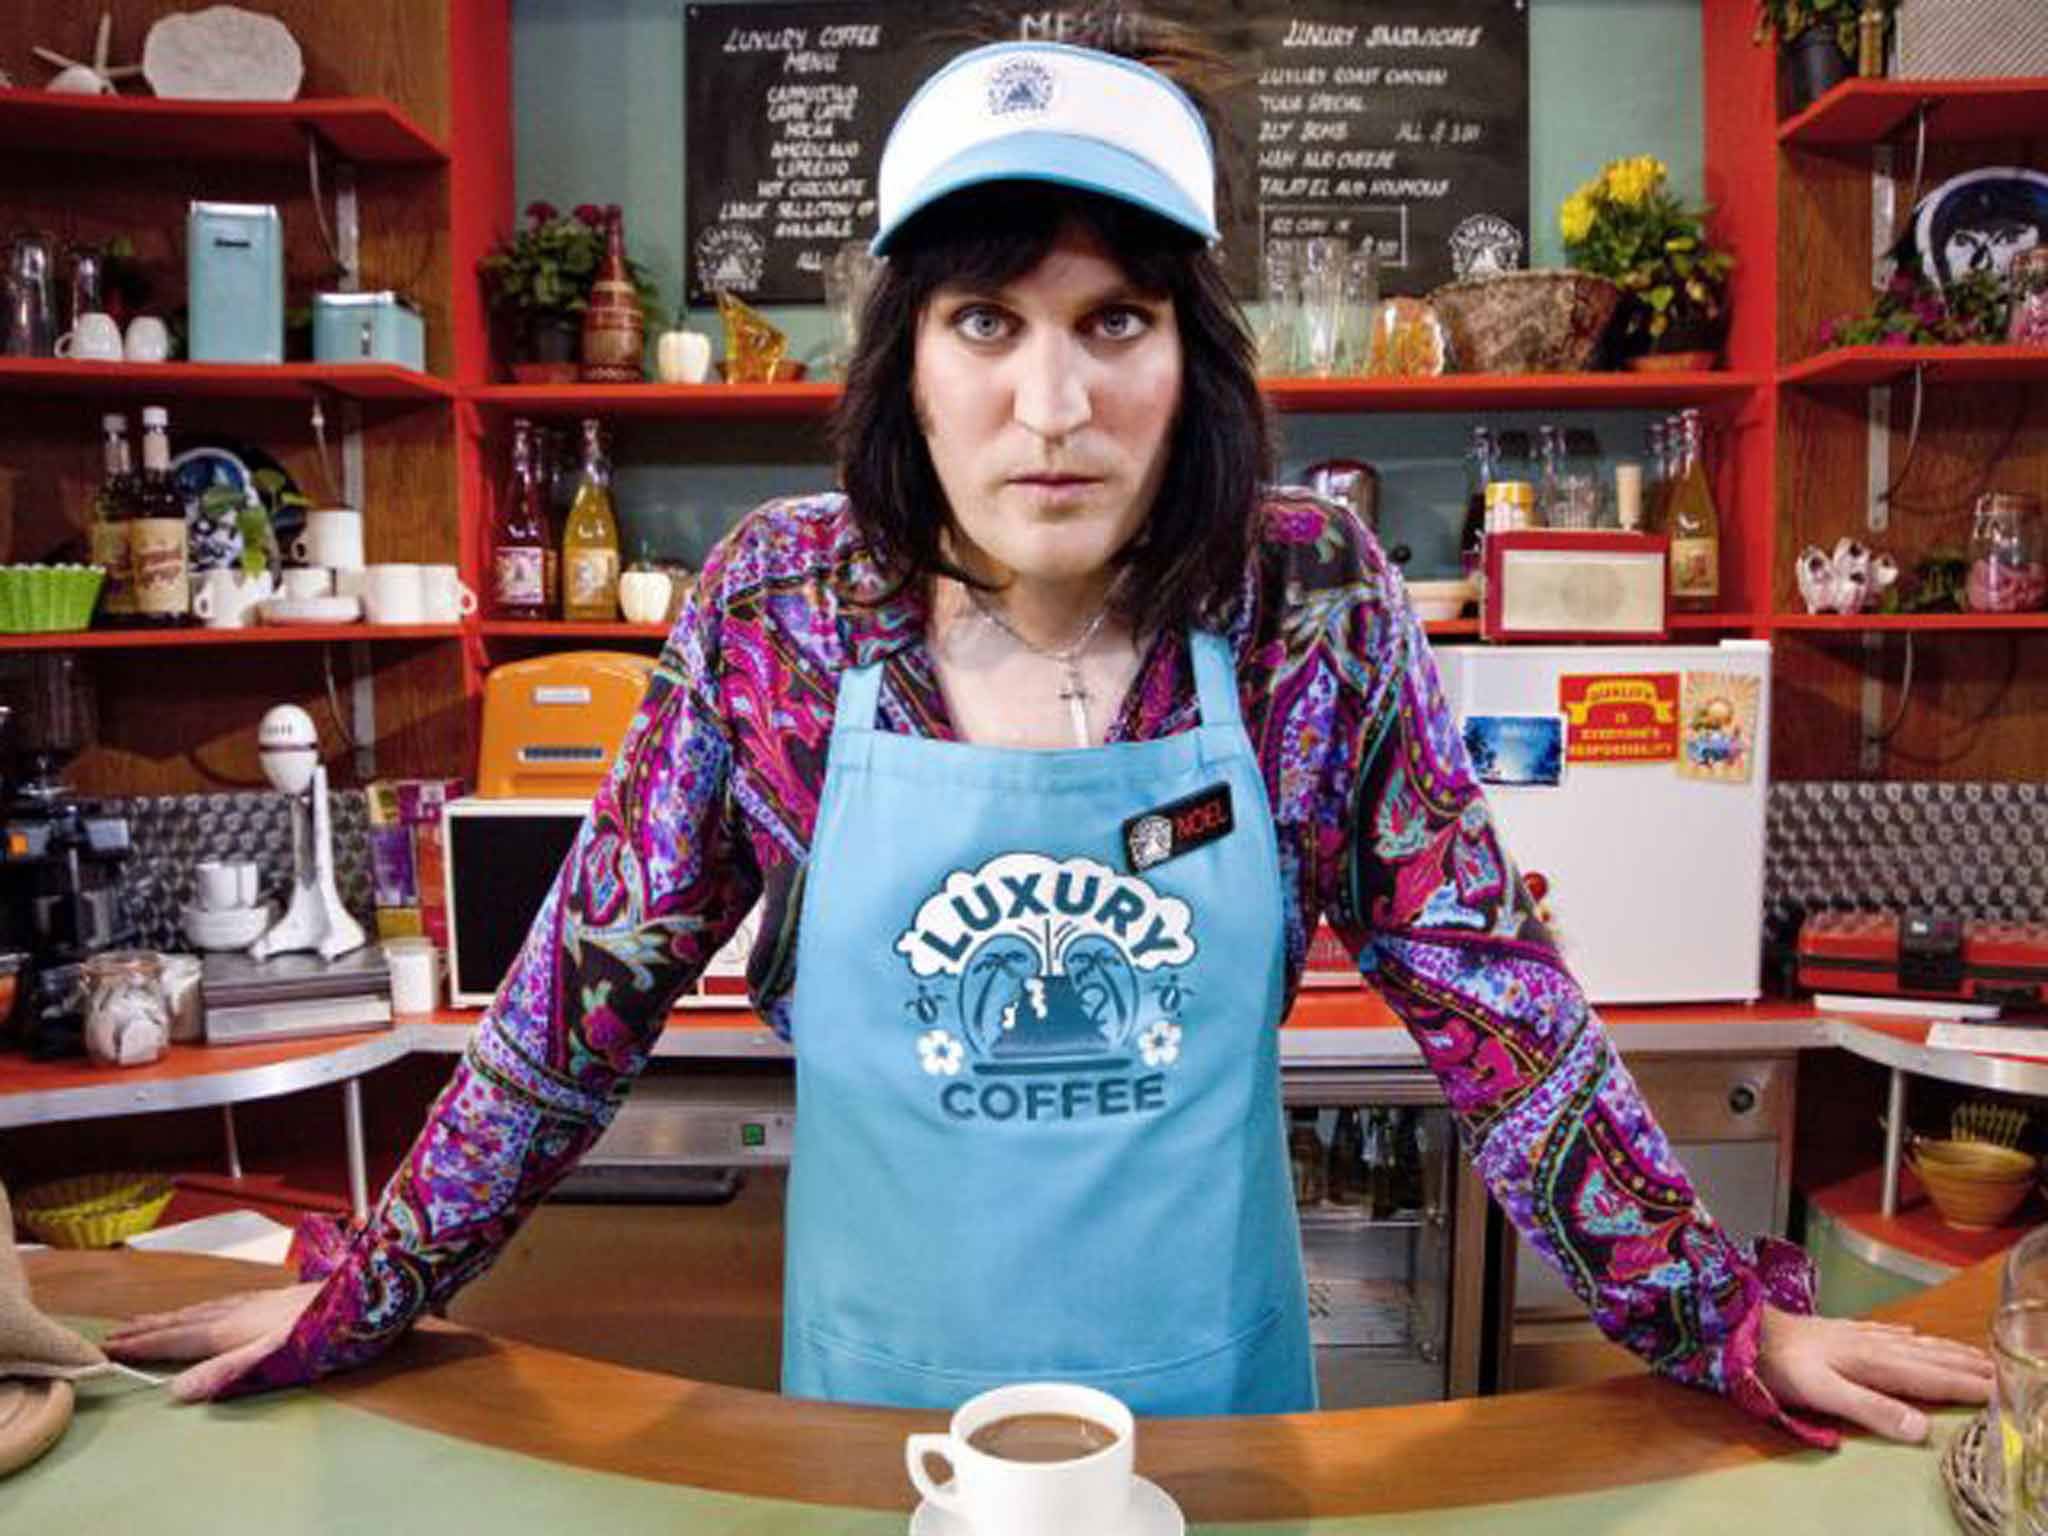 Fun for all the family: Noel Fielding's Luxury Comedy 2: Tales from Painted Hawaii